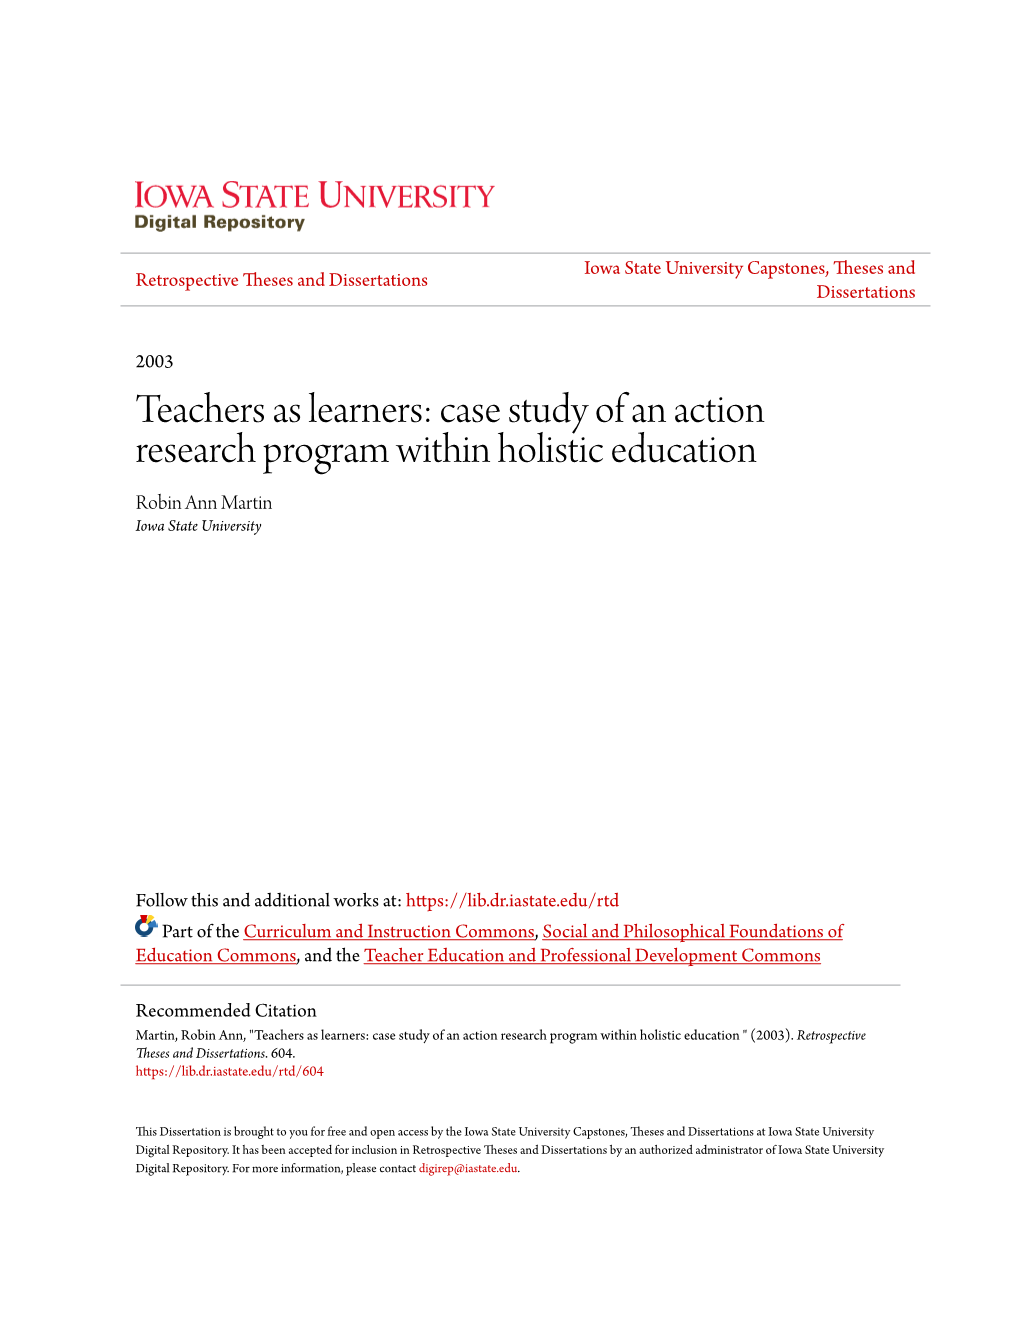 Case Study of an Action Research Program Within Holistic Education Robin Ann Martin Iowa State University